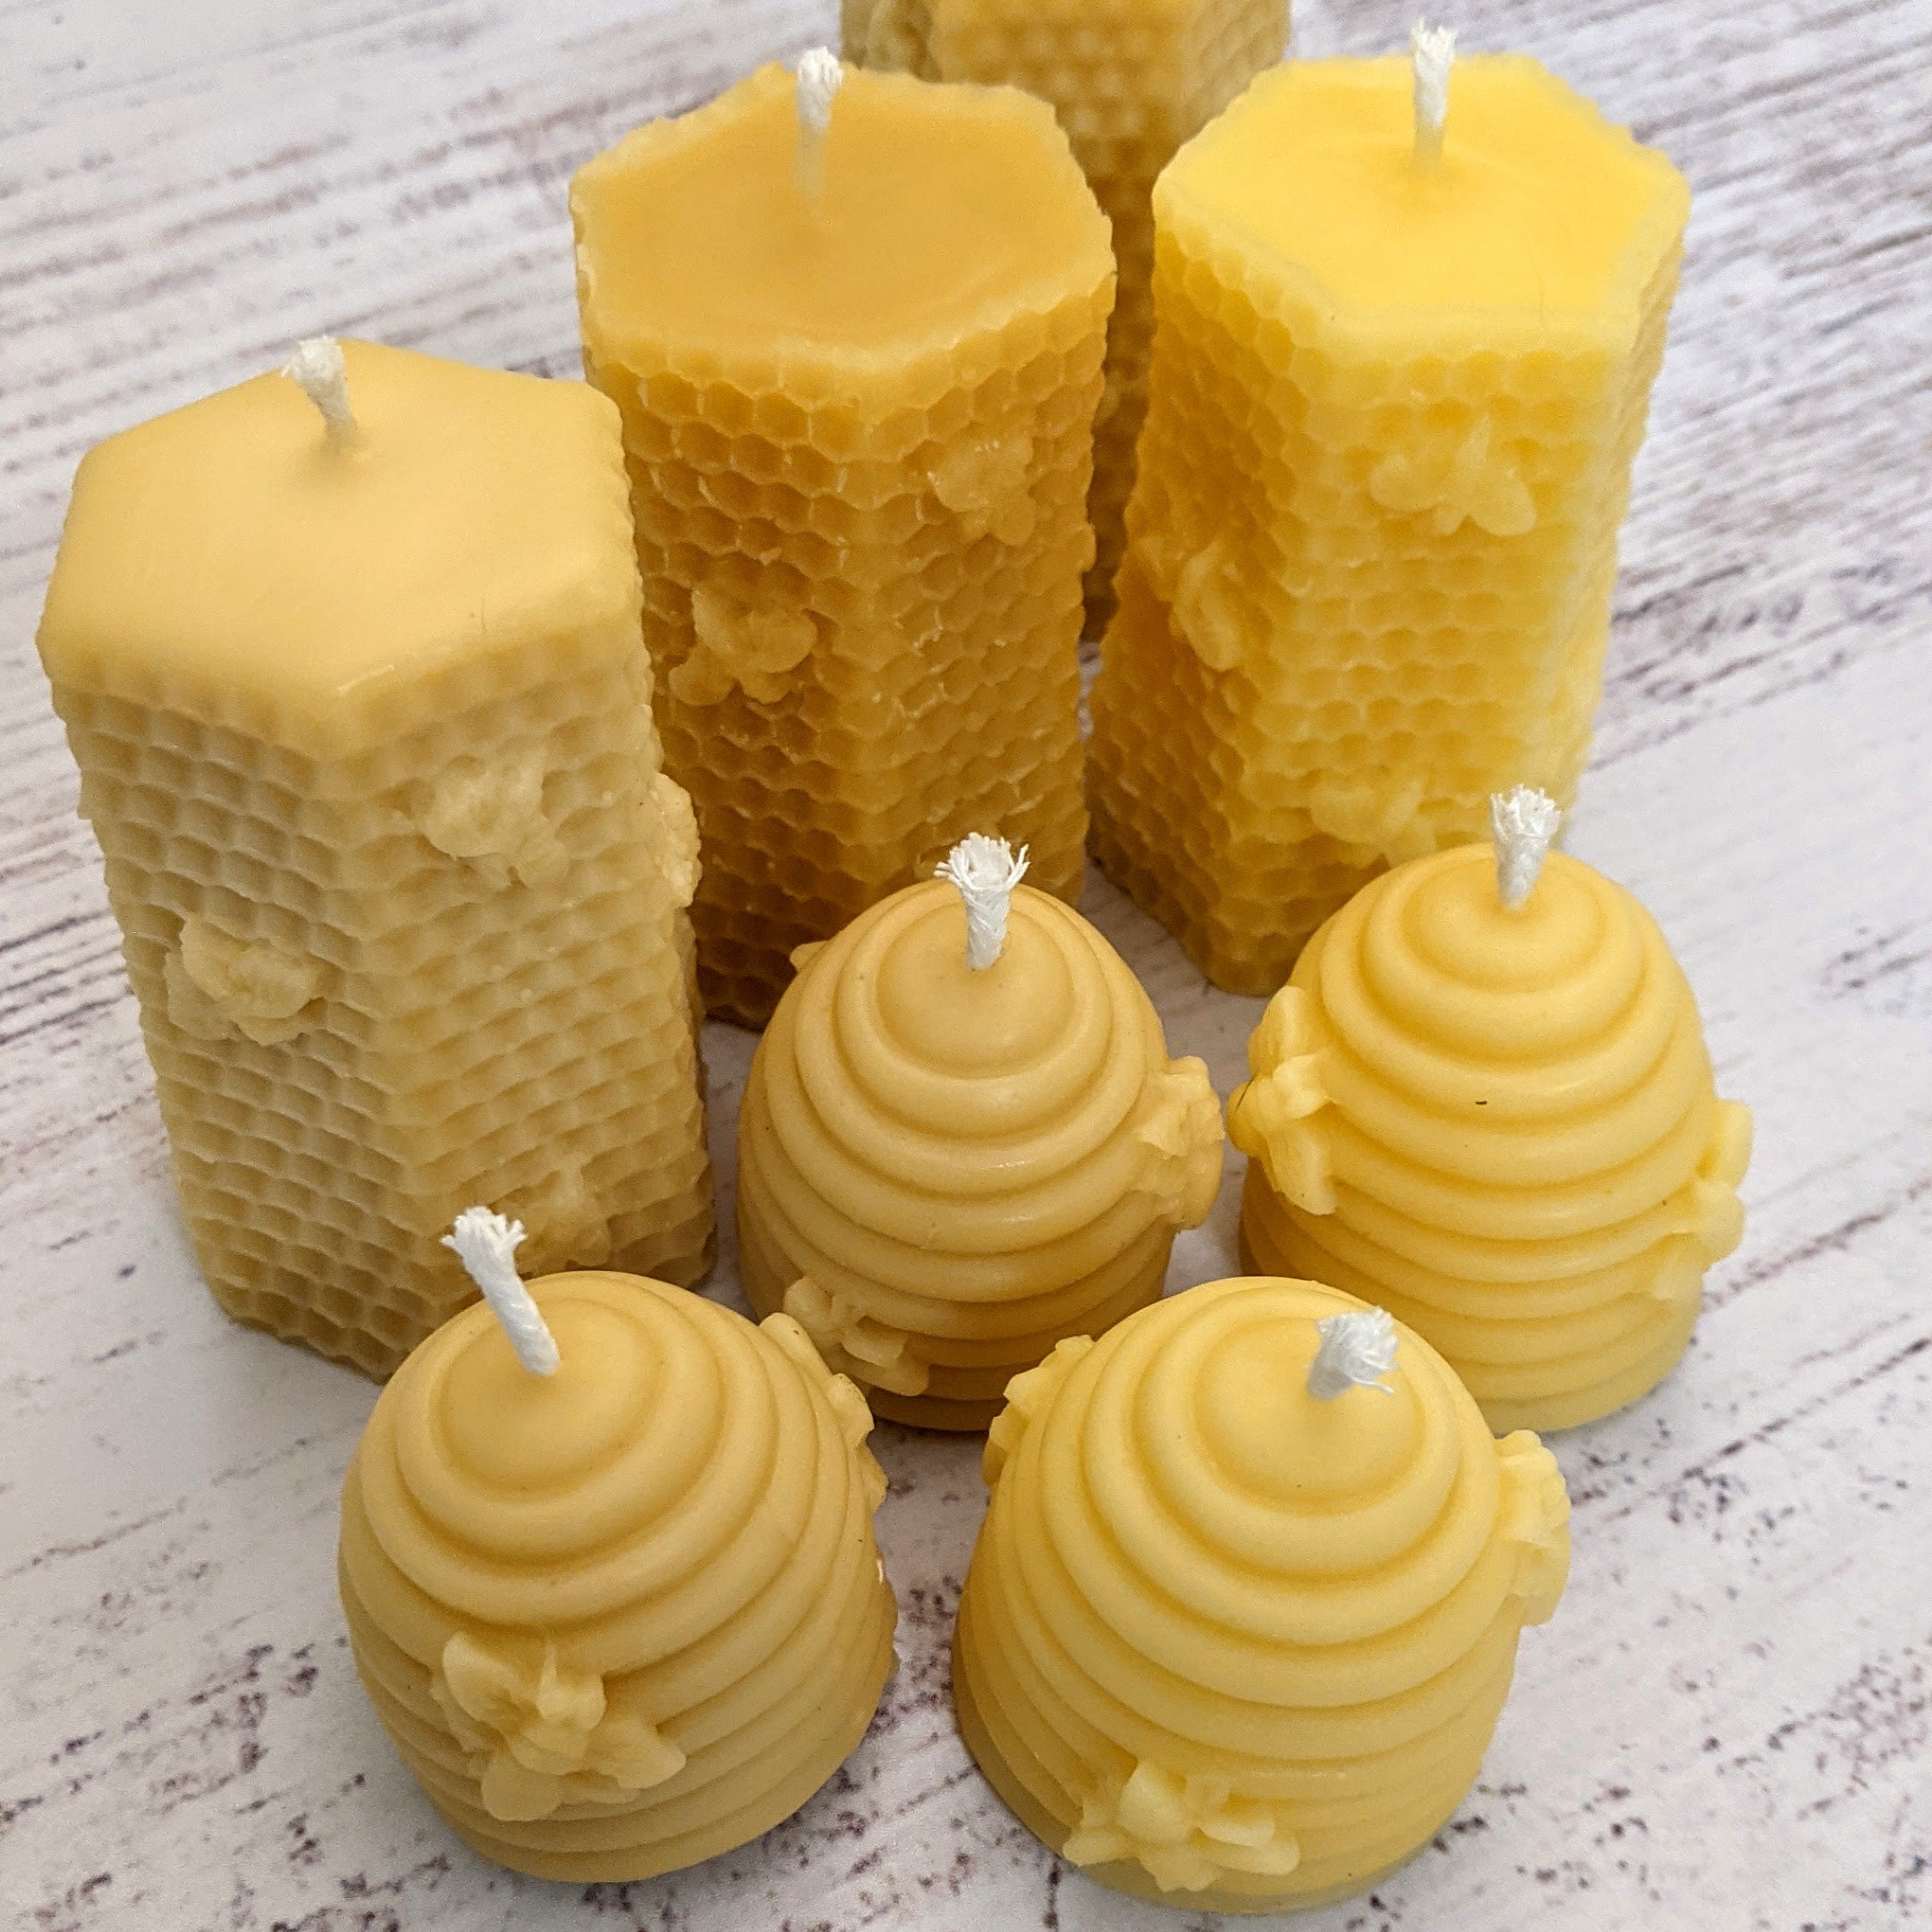 Do you want to make a natural beeswax candle? - Learn to create